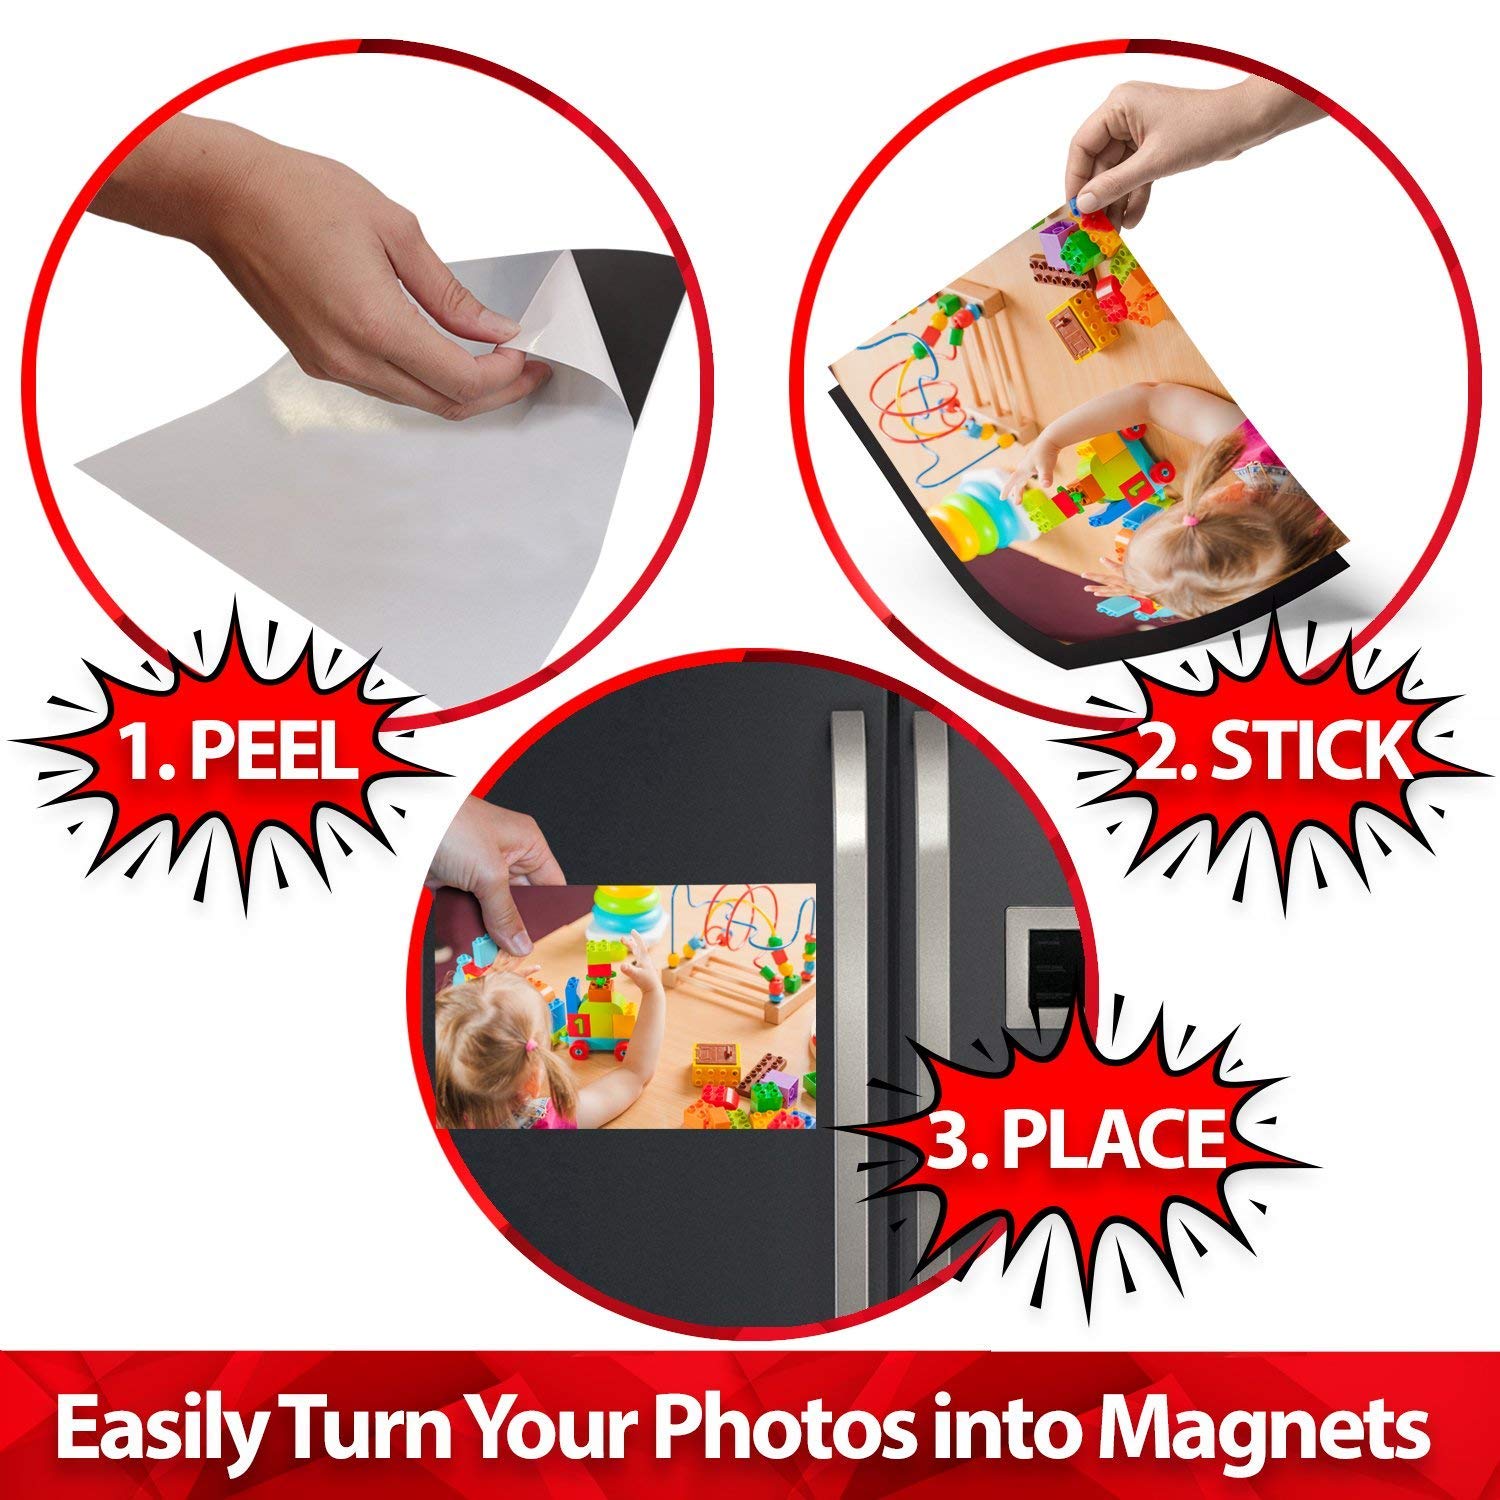 Adhesive Magnetic Sheets Magnetic Sheets With Adhesive - Temu